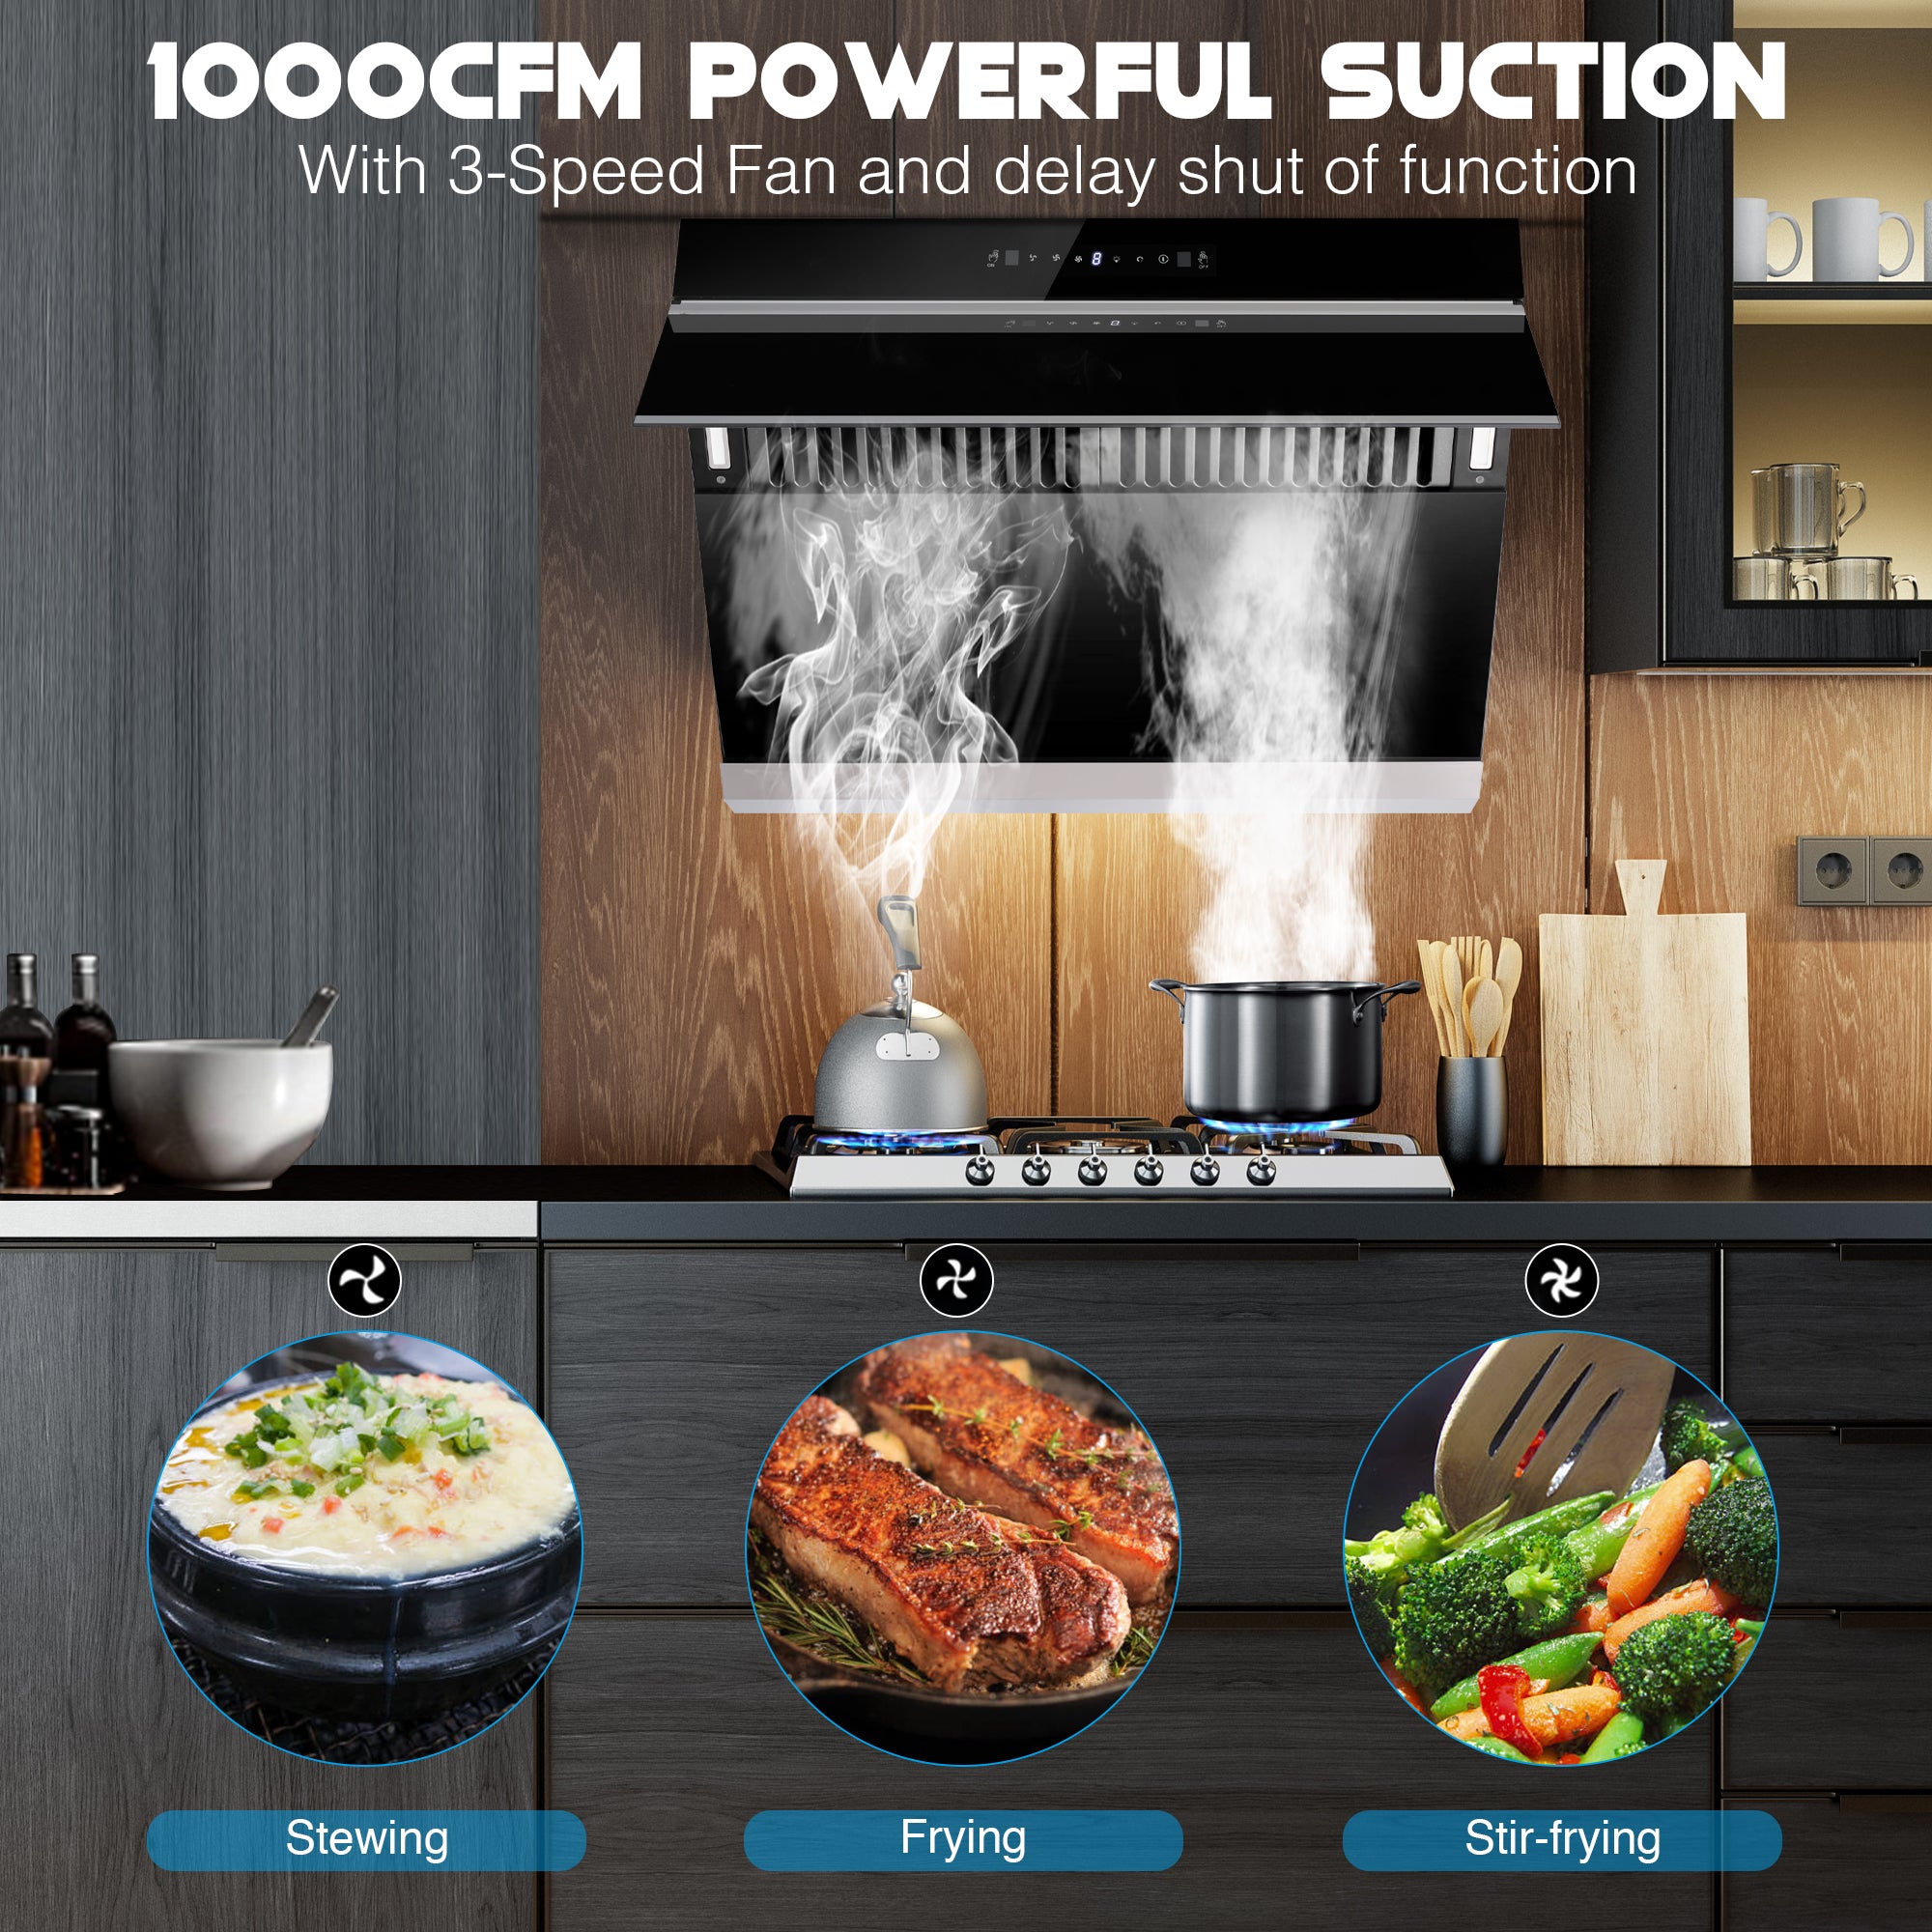 Tieasy 30 inch 900 CFM Wall Mount or Under Cabinet Range Hood with Heating Auto-Cleaning Function - ‎USCX08T75